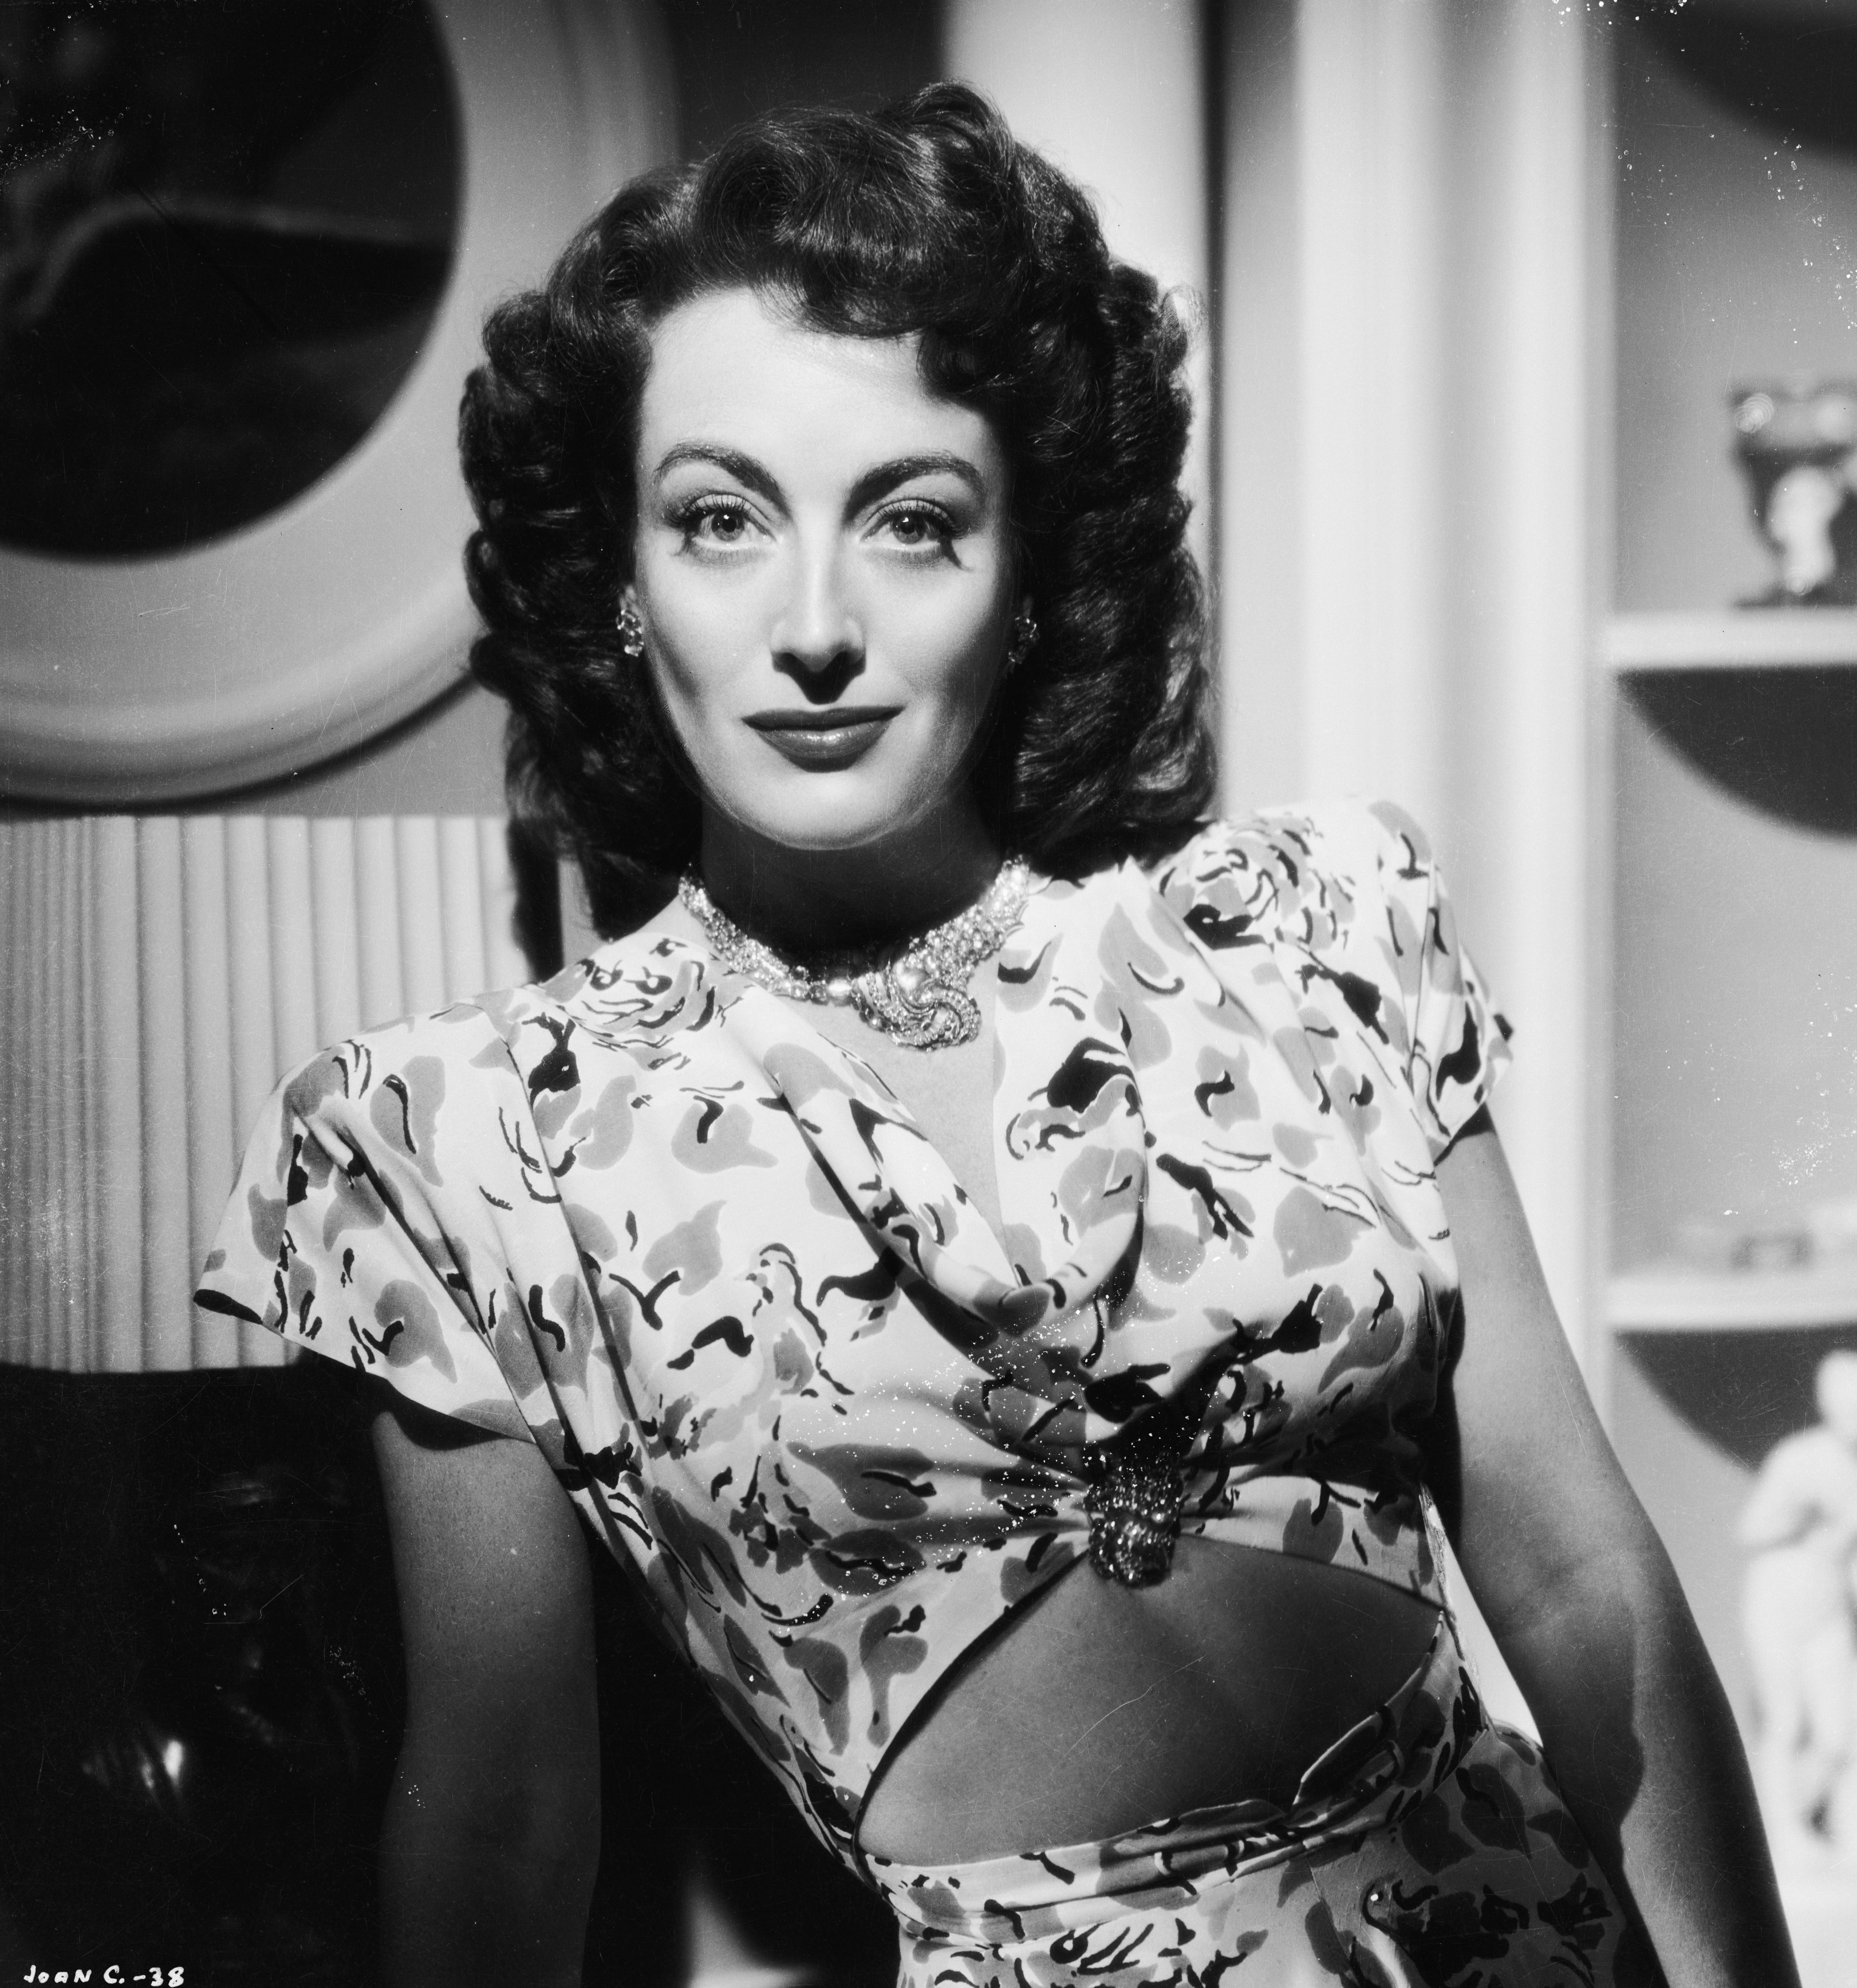 Joan Crawford in her starring role in "Mildred Pierce," circa 1944 | Photo: Getty Images